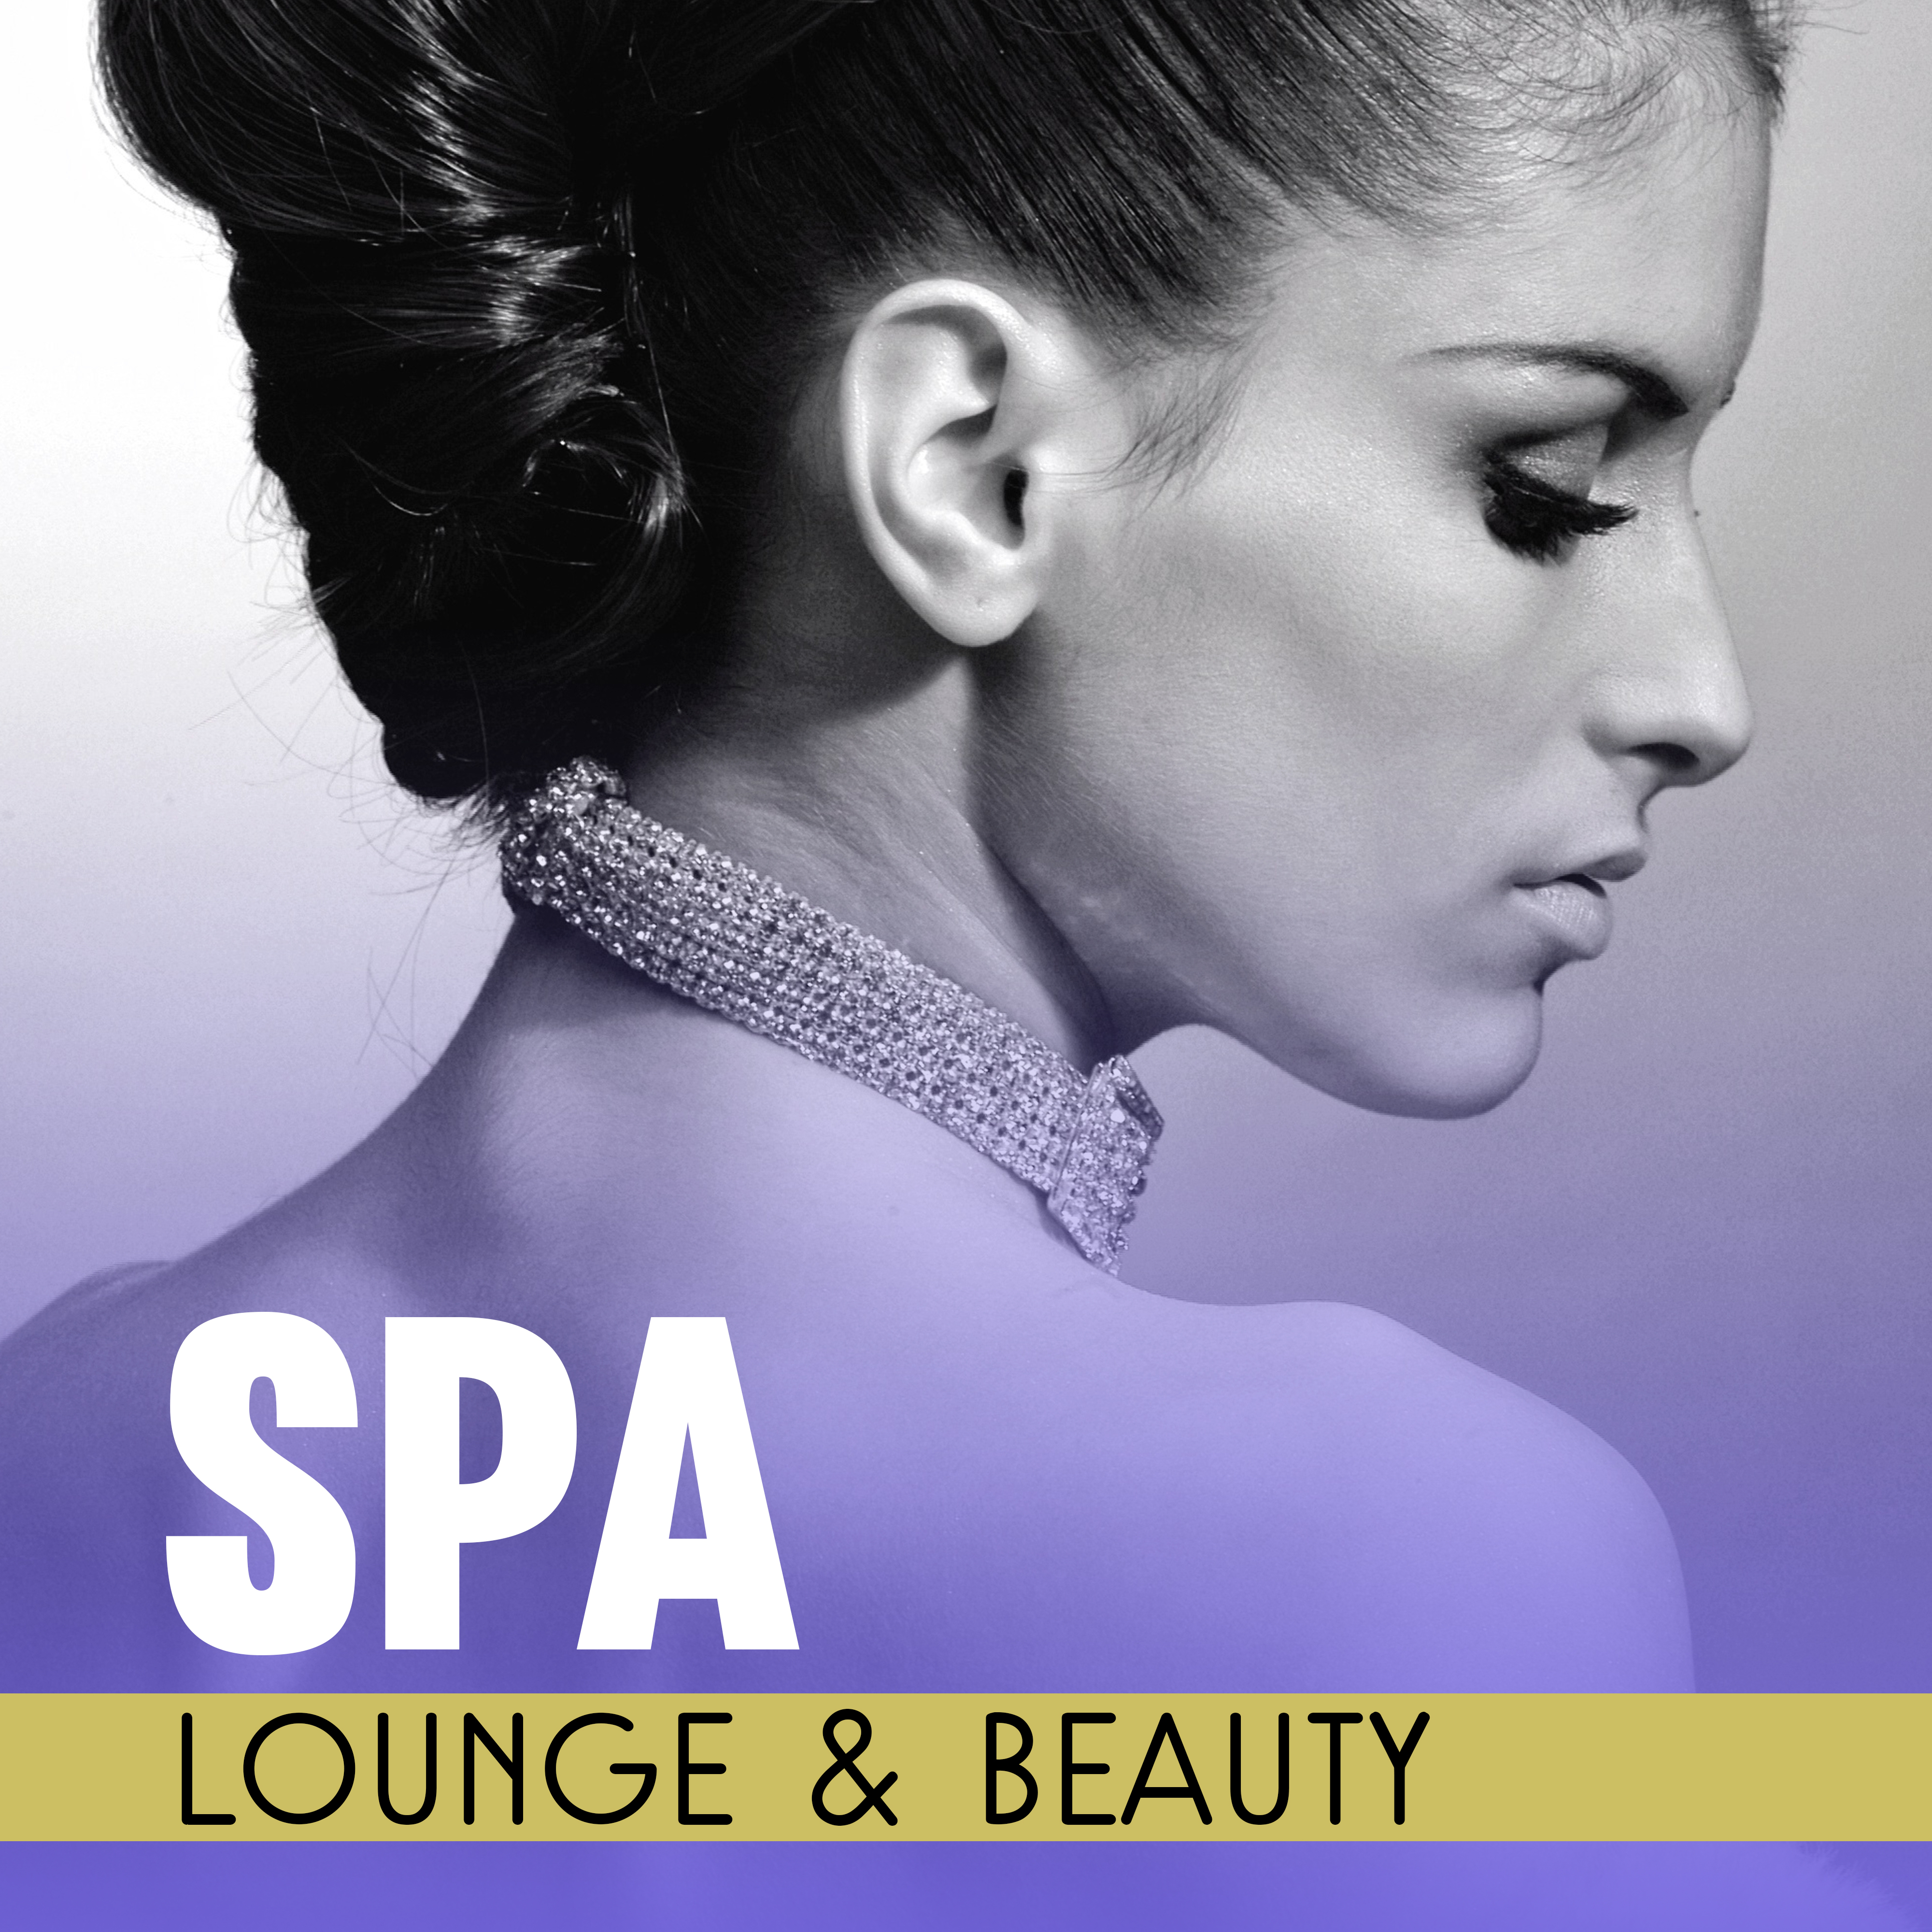 Spa Lounge & Beauty – Peaceful Sounds of Nature, Relaxation Spa, Wellness Treatments, Hotel Music